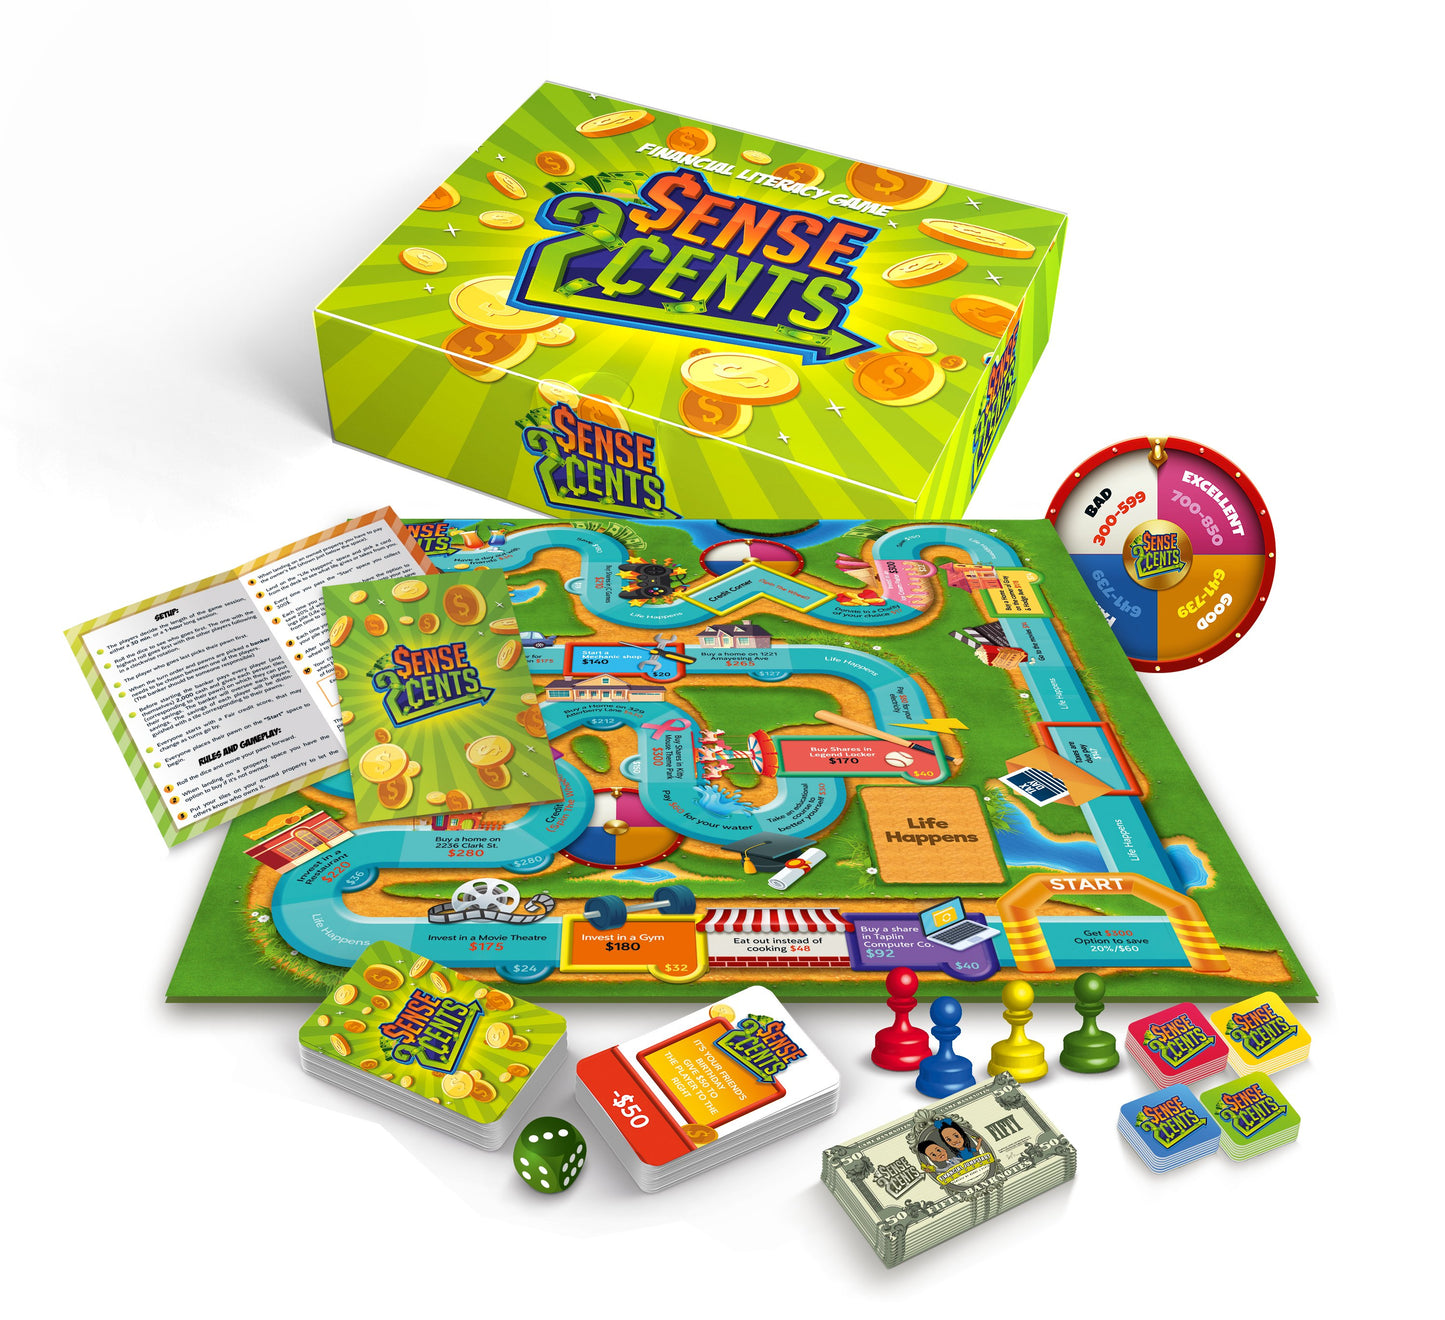 Sense 2 Cents “The Financial Literacy” Board Game”